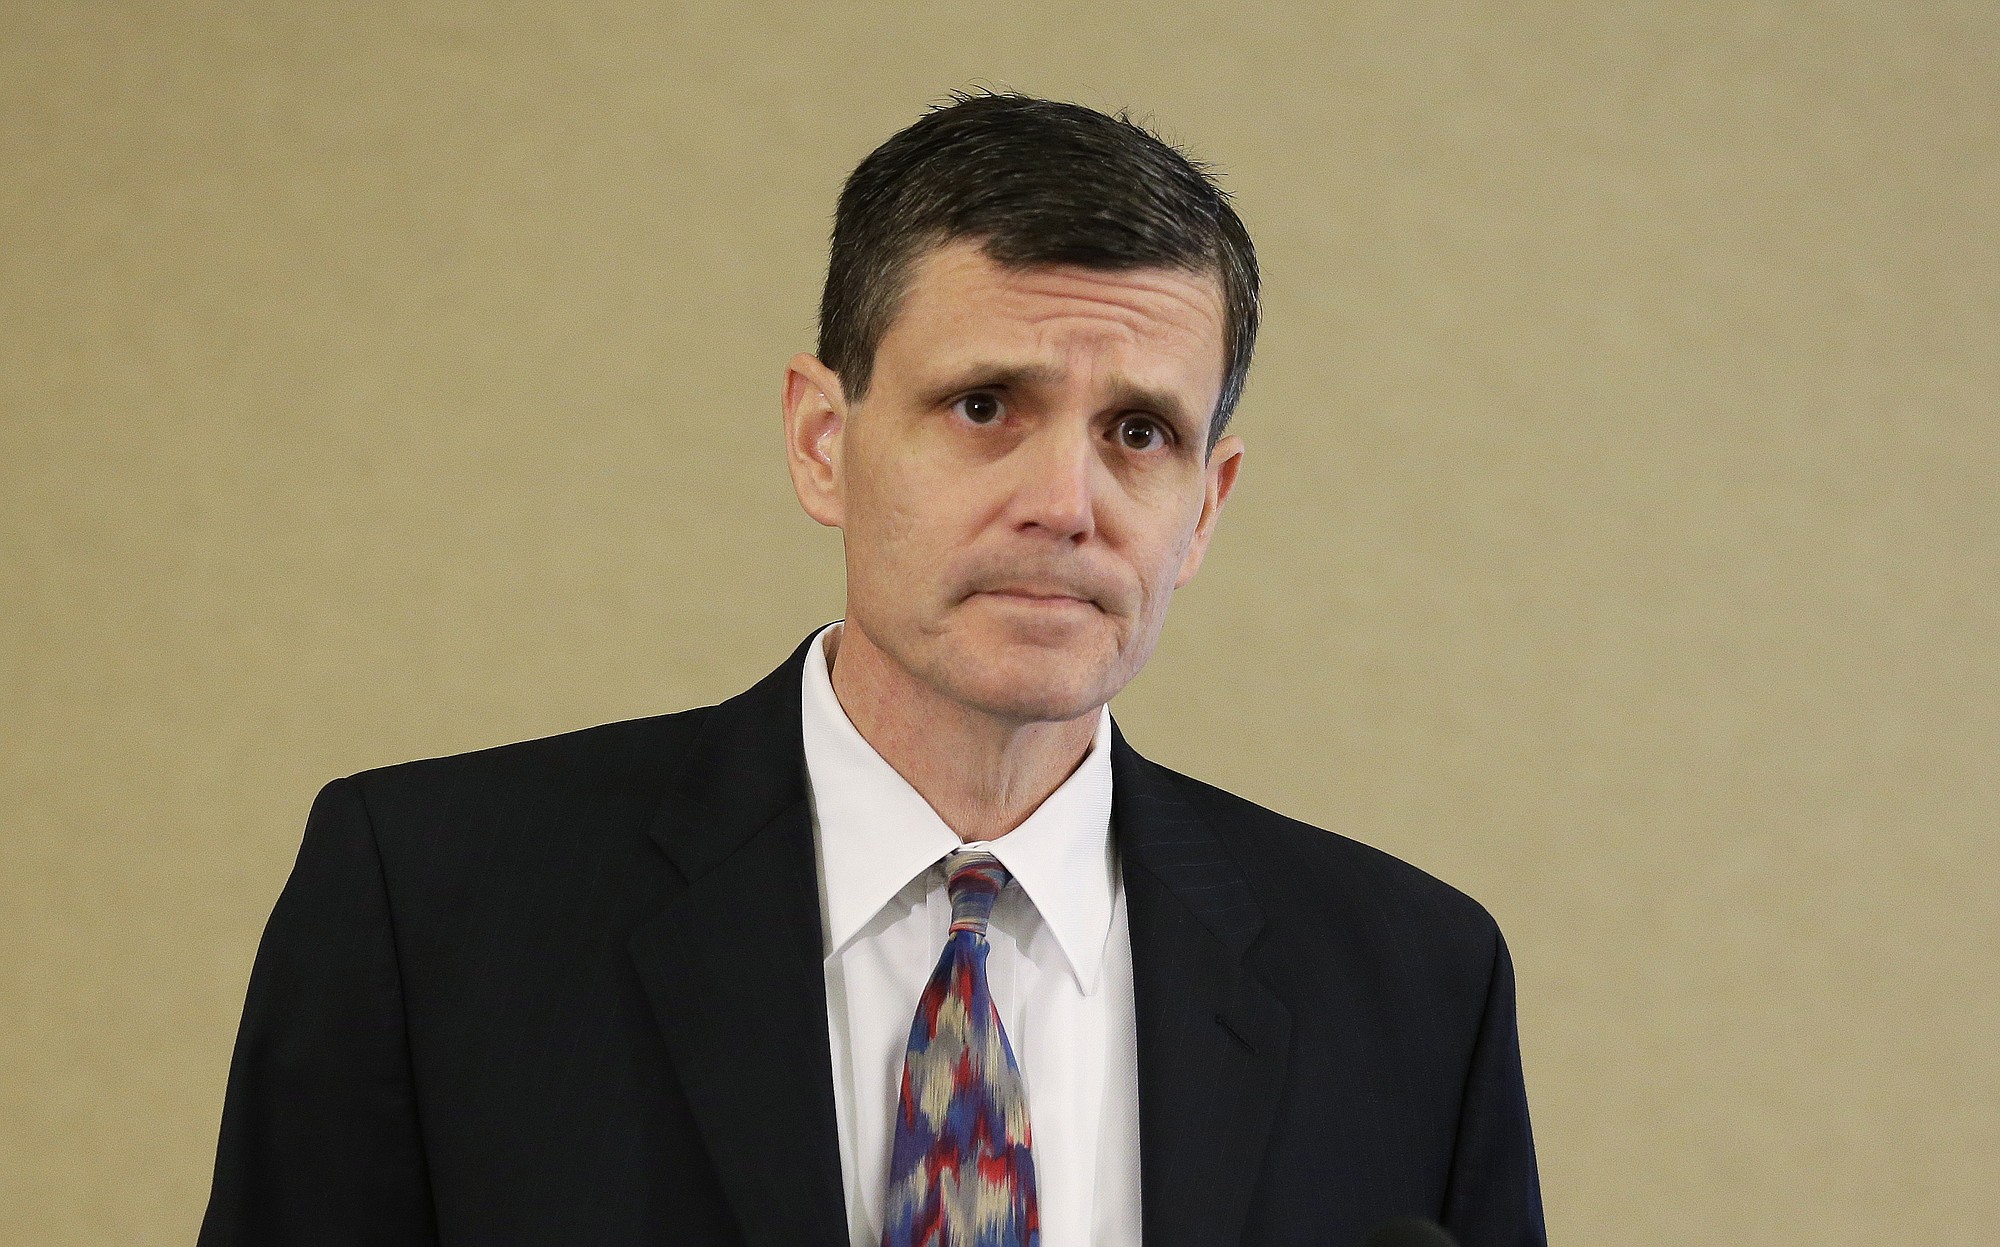 Washington state Auditor Troy Kelley listens to a question from a reporter Thursday in Tacoma. Earlier in the day, Kelley entered a not guilty plea to a federal grand jury indictment on charges of filing false tax returns, attempted obstruction of a civil lawsuit and possession of stolen property. Gov. Jay Inslee has called for Kelley to resign. (AP Photo/Ted S.